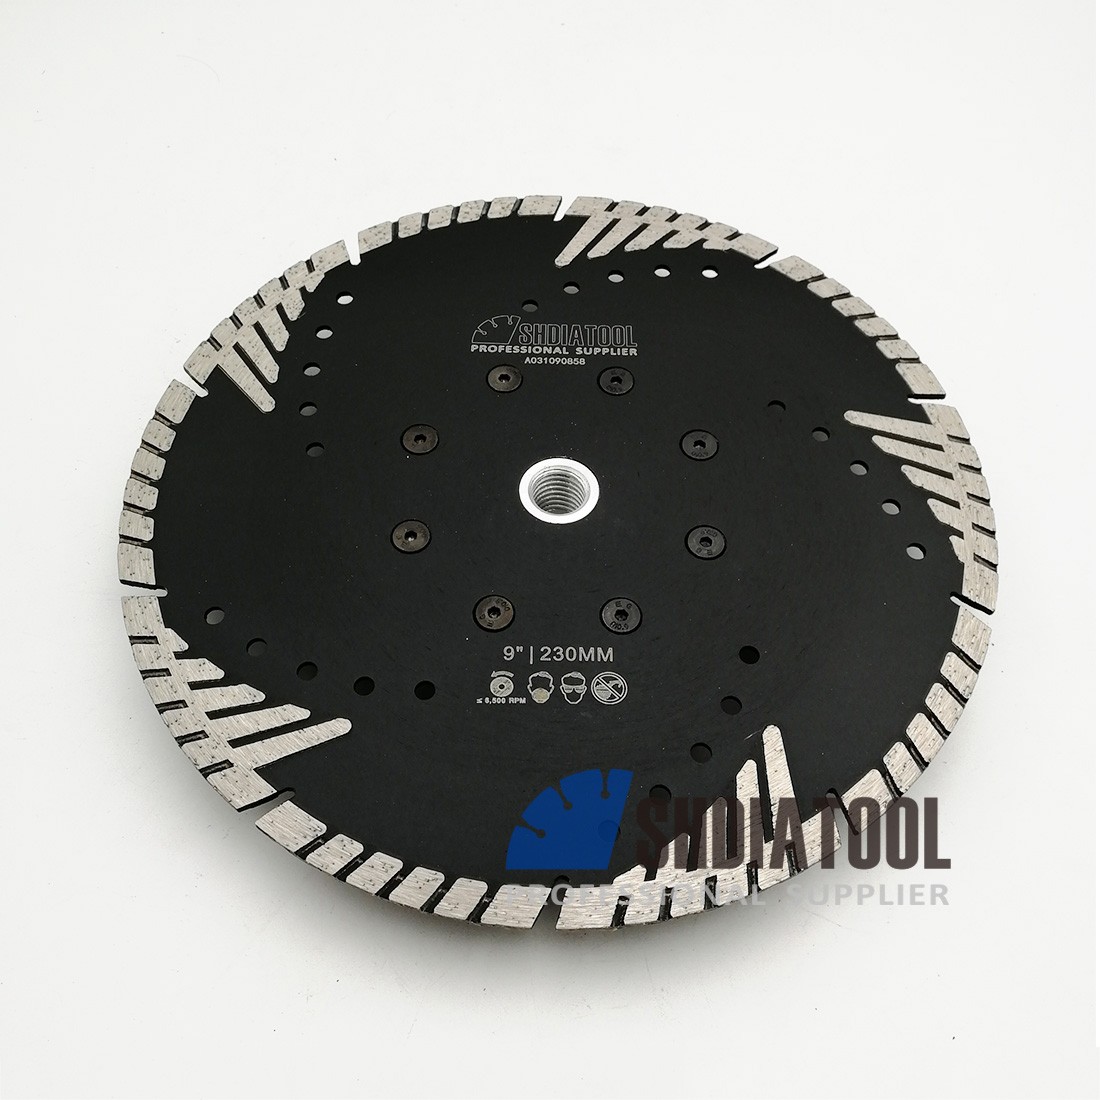 Diamond Blade with Slant protection teeth(10 sizes available)